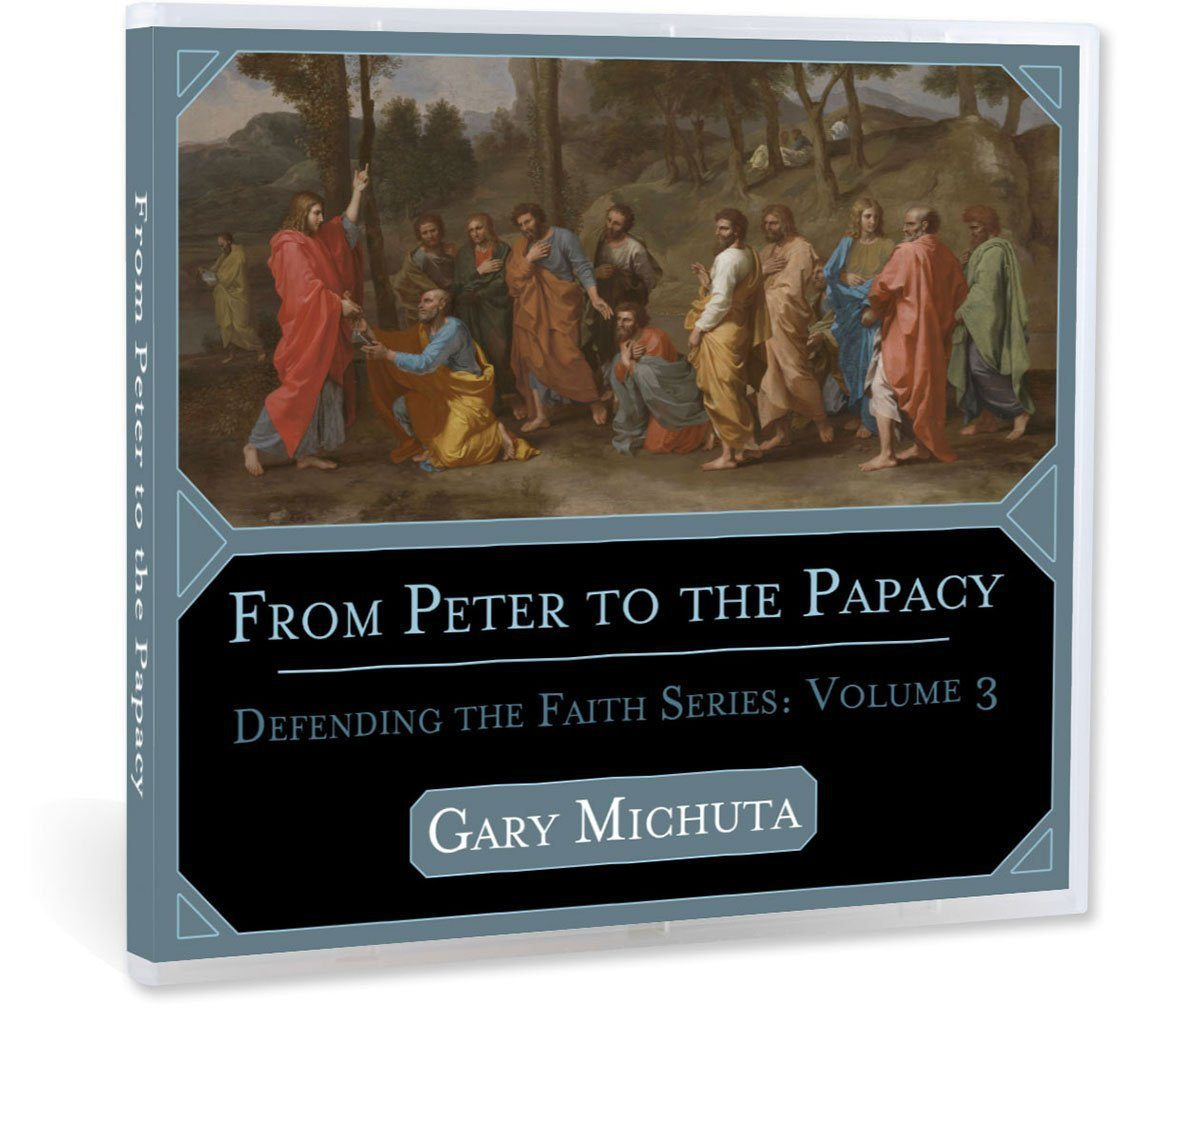 A Catholic Bible study on the papacy and first Pope, Saint Peter, as the rock upon which Jesus built his Church CD